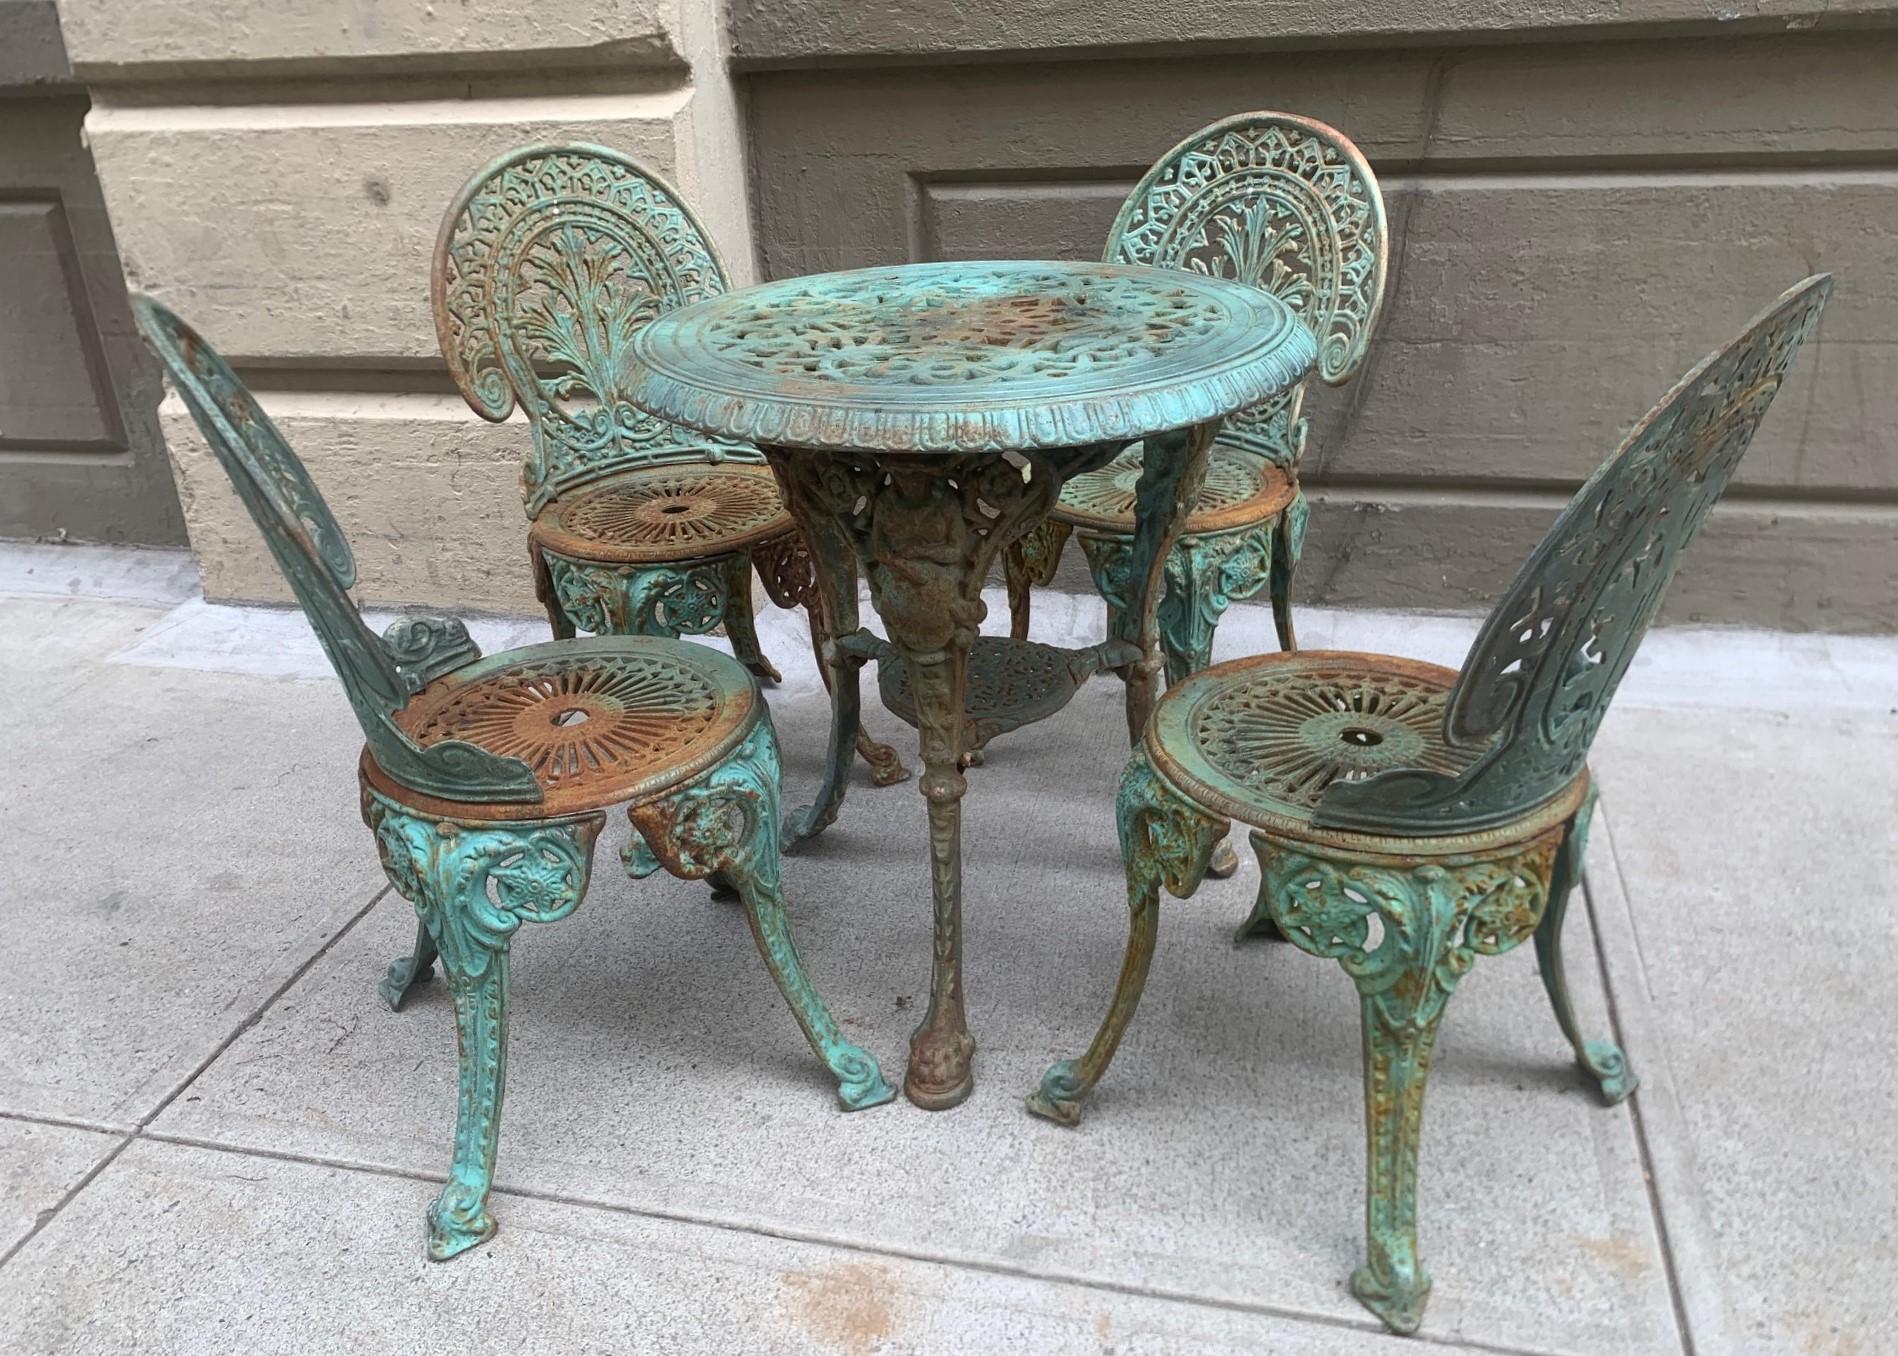 Vintage Victorian five-piece cast iron outdoor patio set. The set has a decorative pattern and the table has figures to the top of the legs.
Table measures: 28 height x 27 diameter.
Chairs measures: 34 H x 17 W x 16 D.